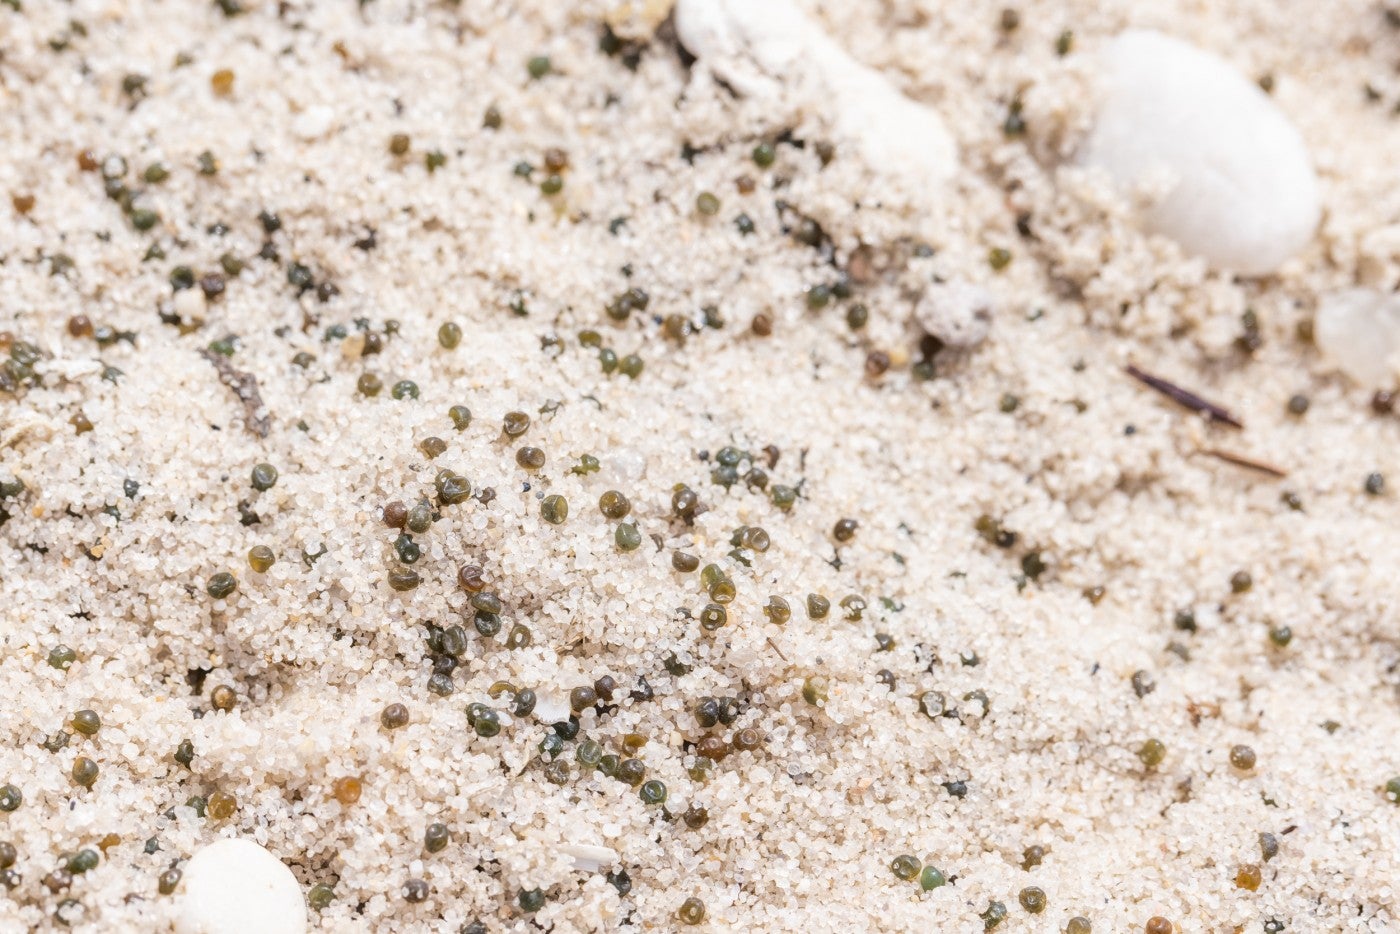 Sand covered in tiny, blue-green horseshoe crab eggs